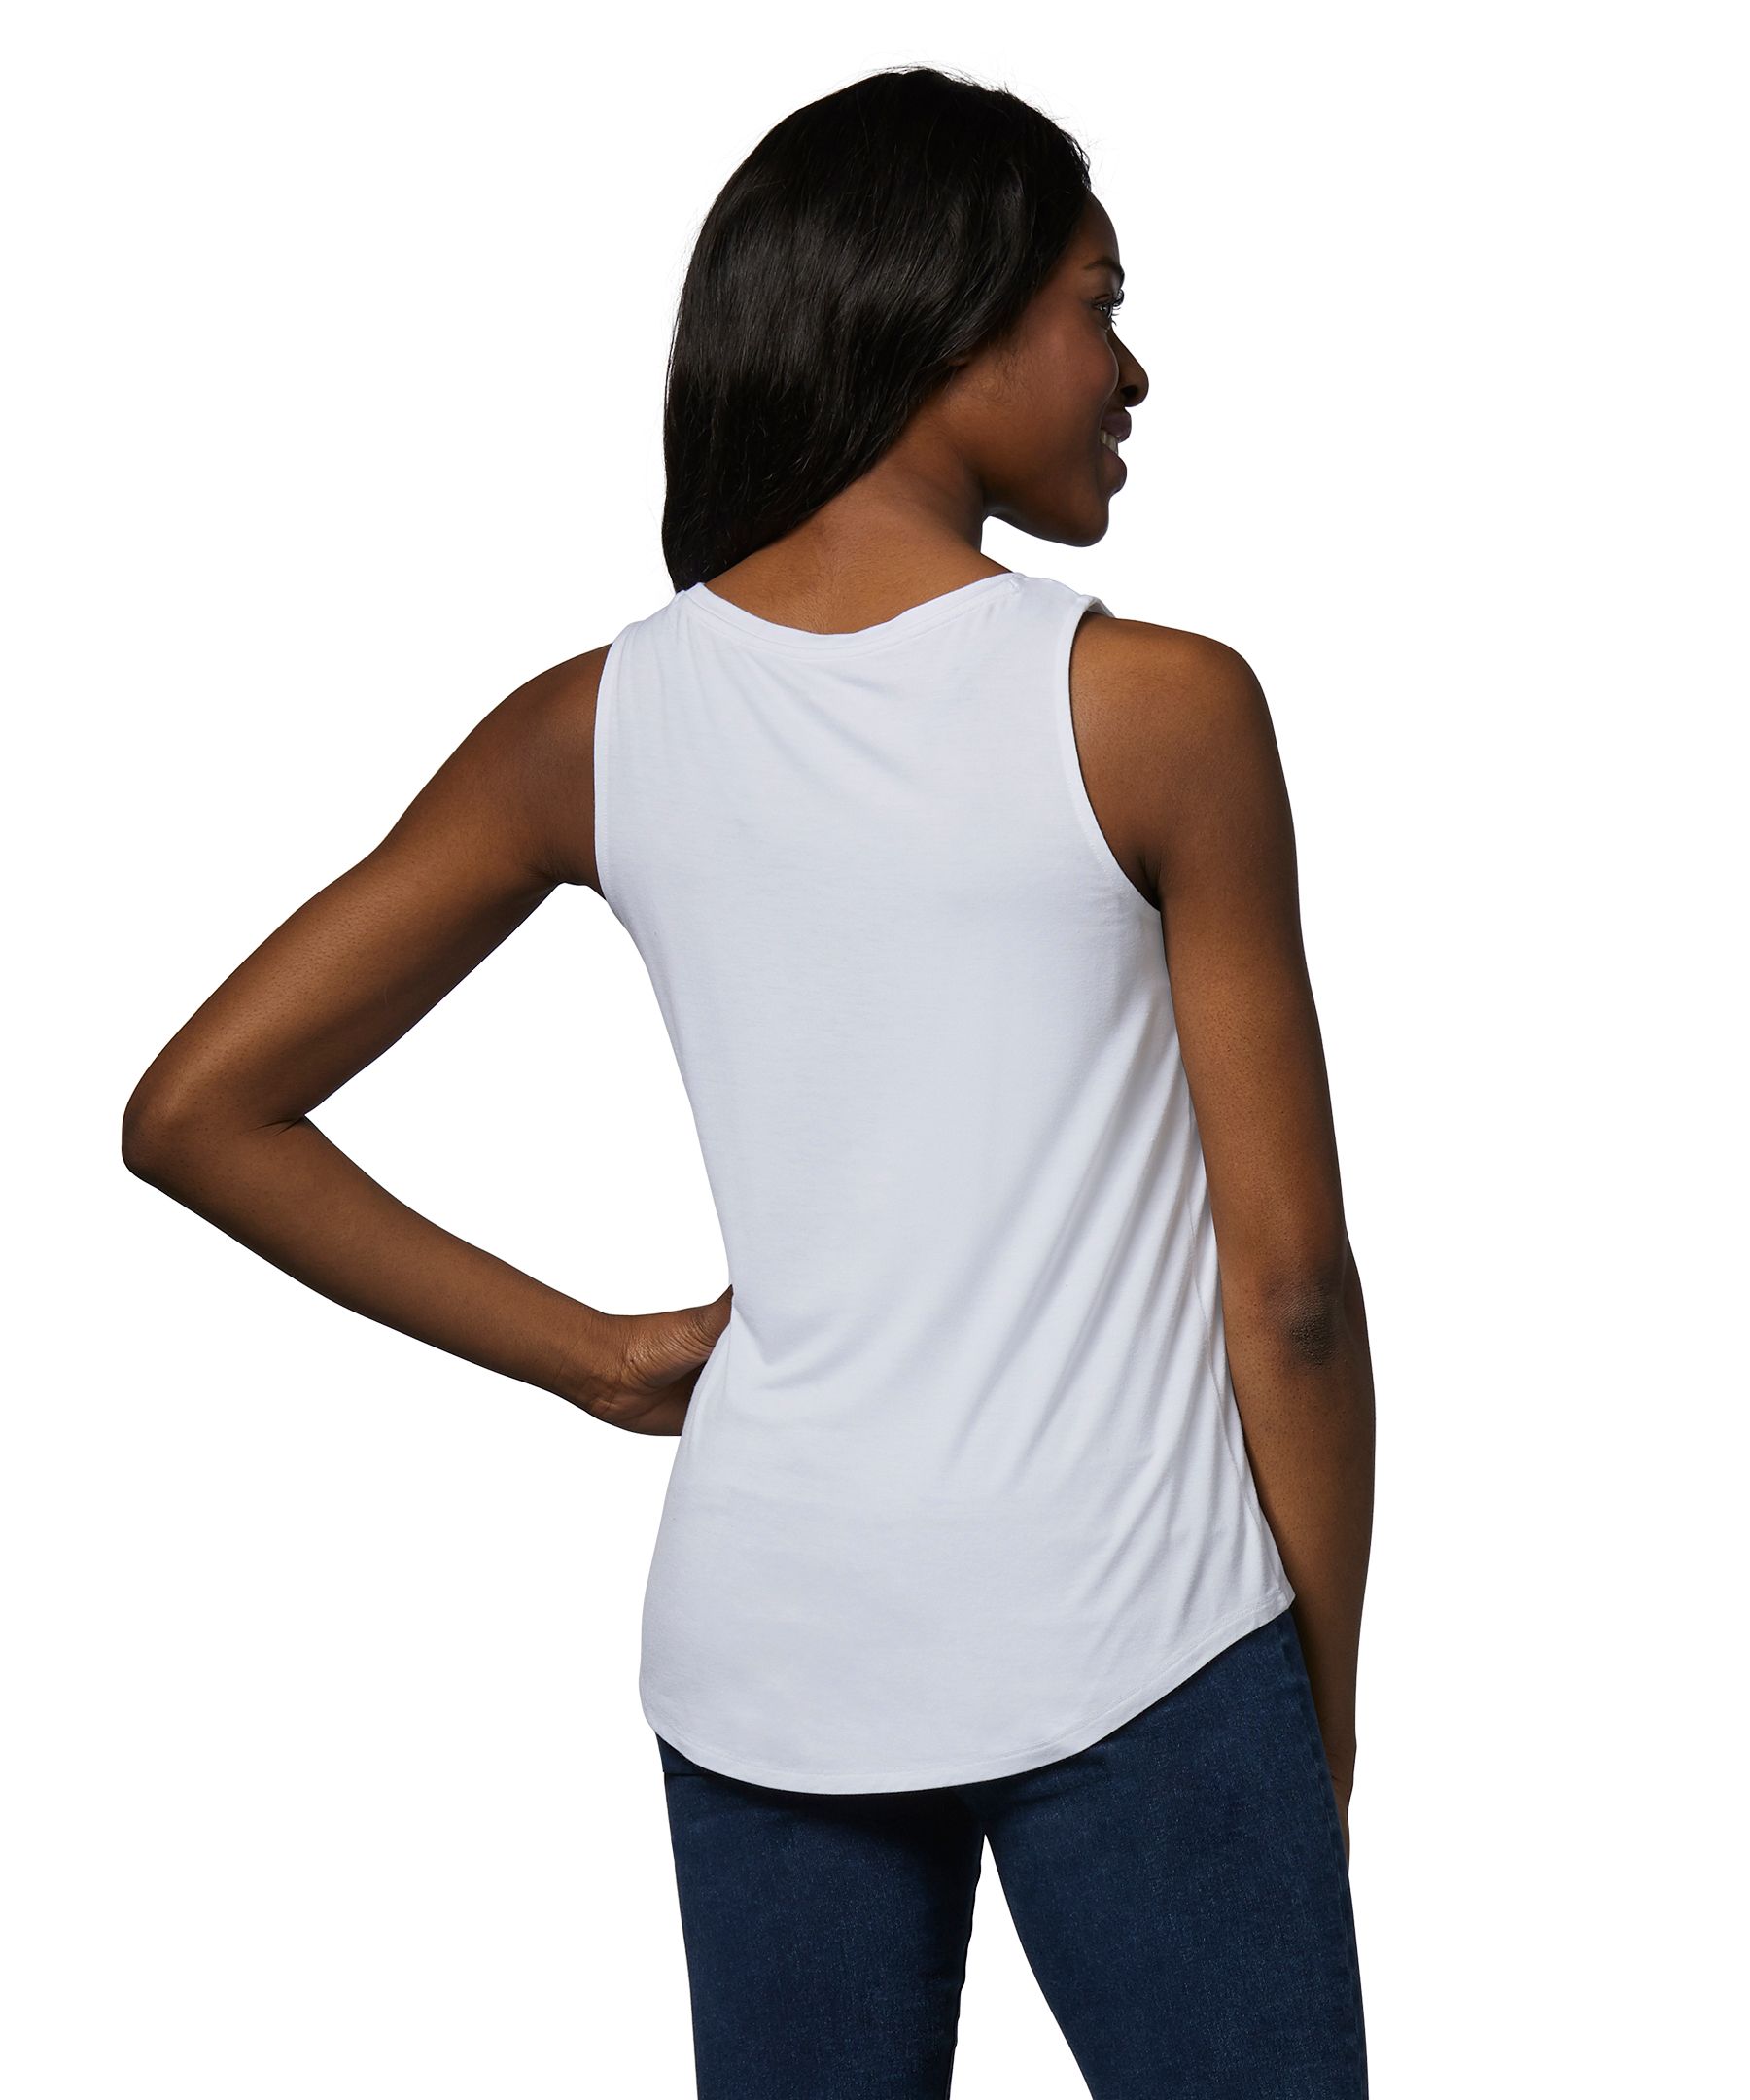 Grey Sleeveless and tank tops for Women